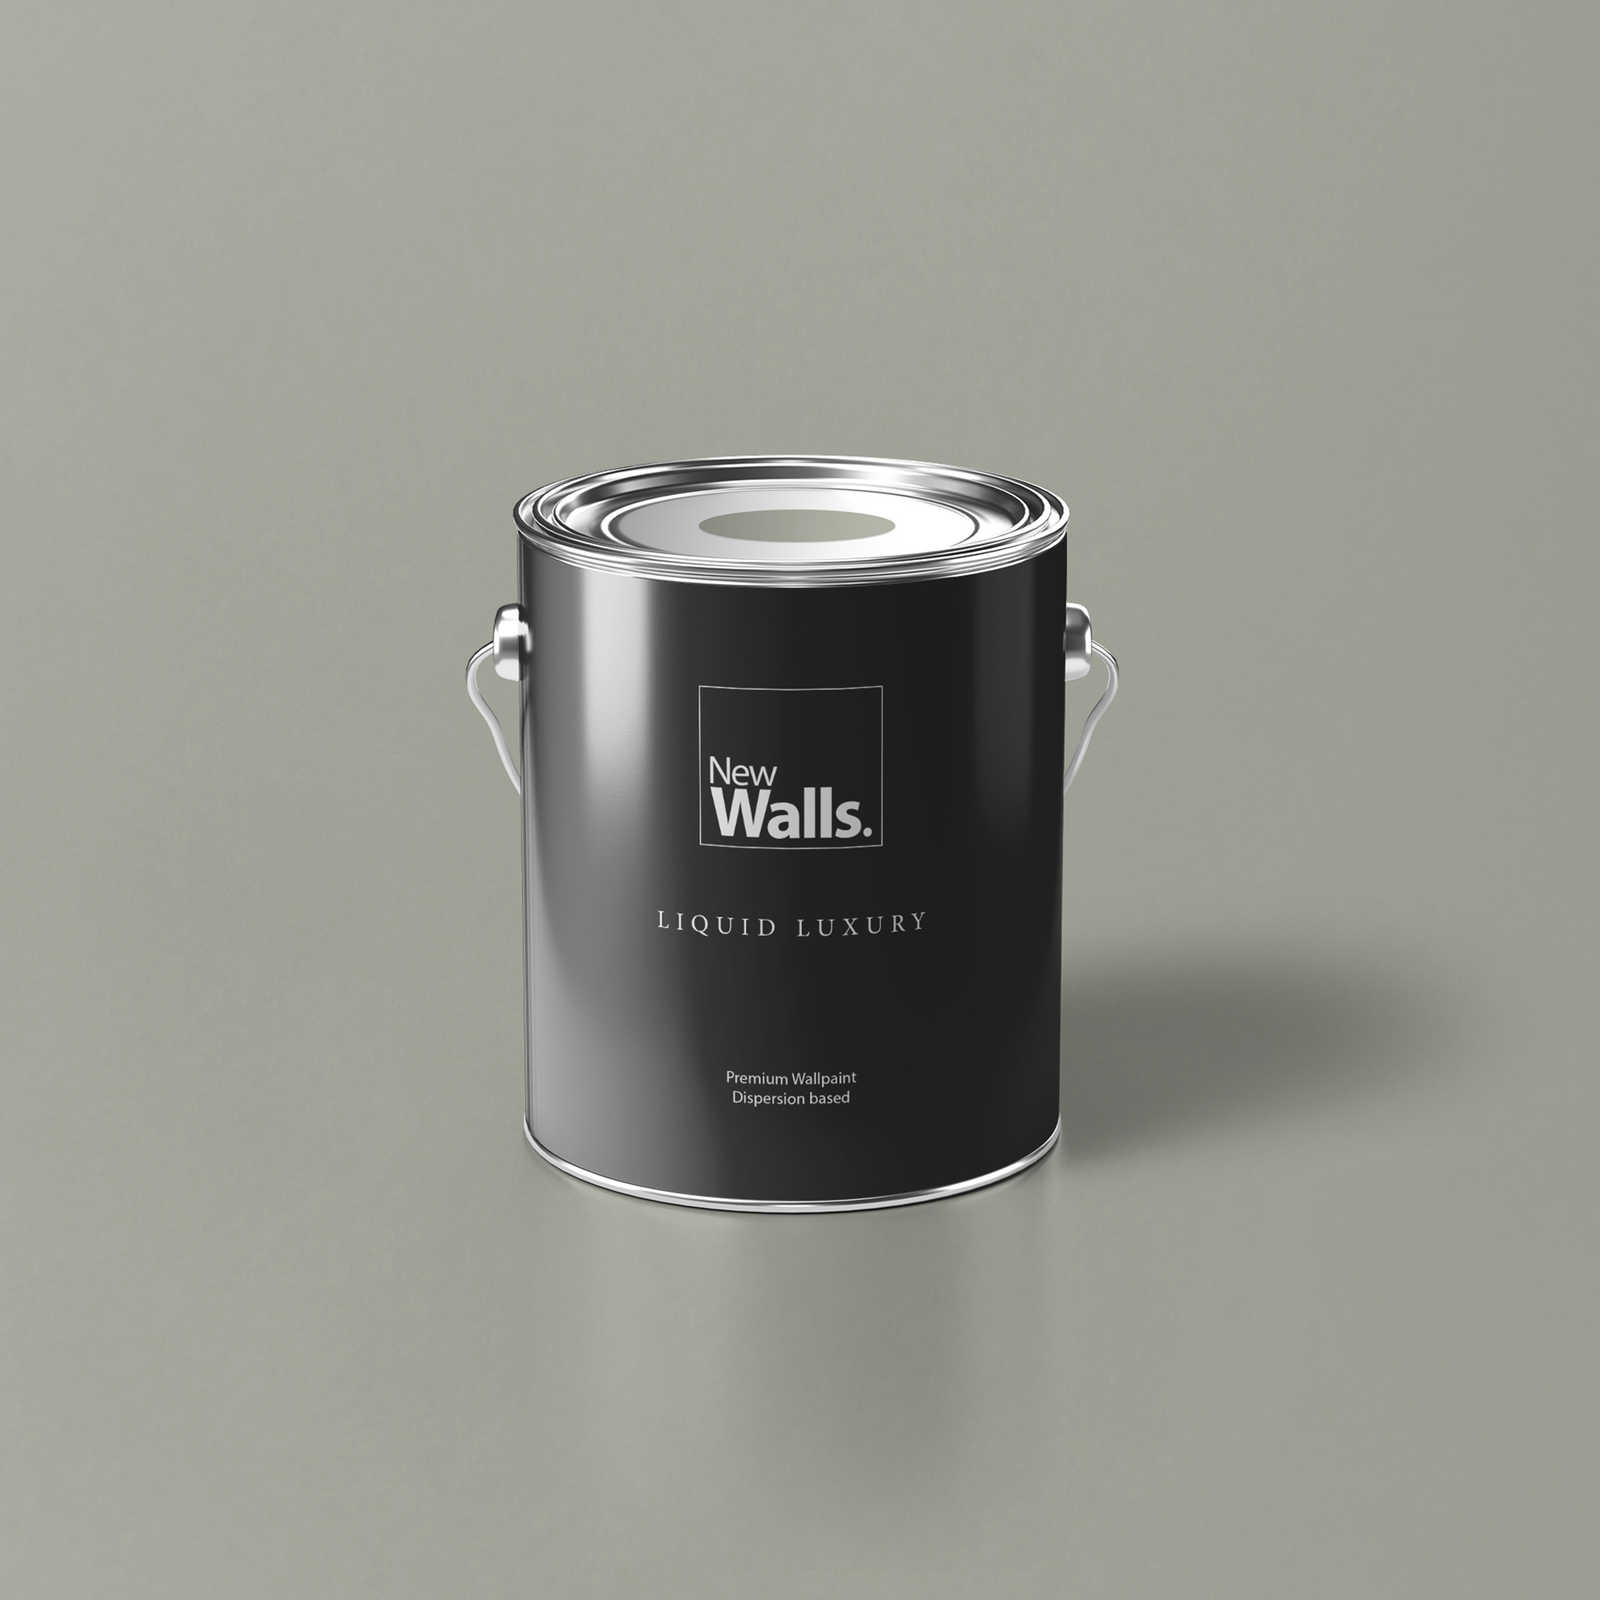 Premium Wall Paint Soft Olive Green »Talented calm taupe« NW705 – 2.5 litre
